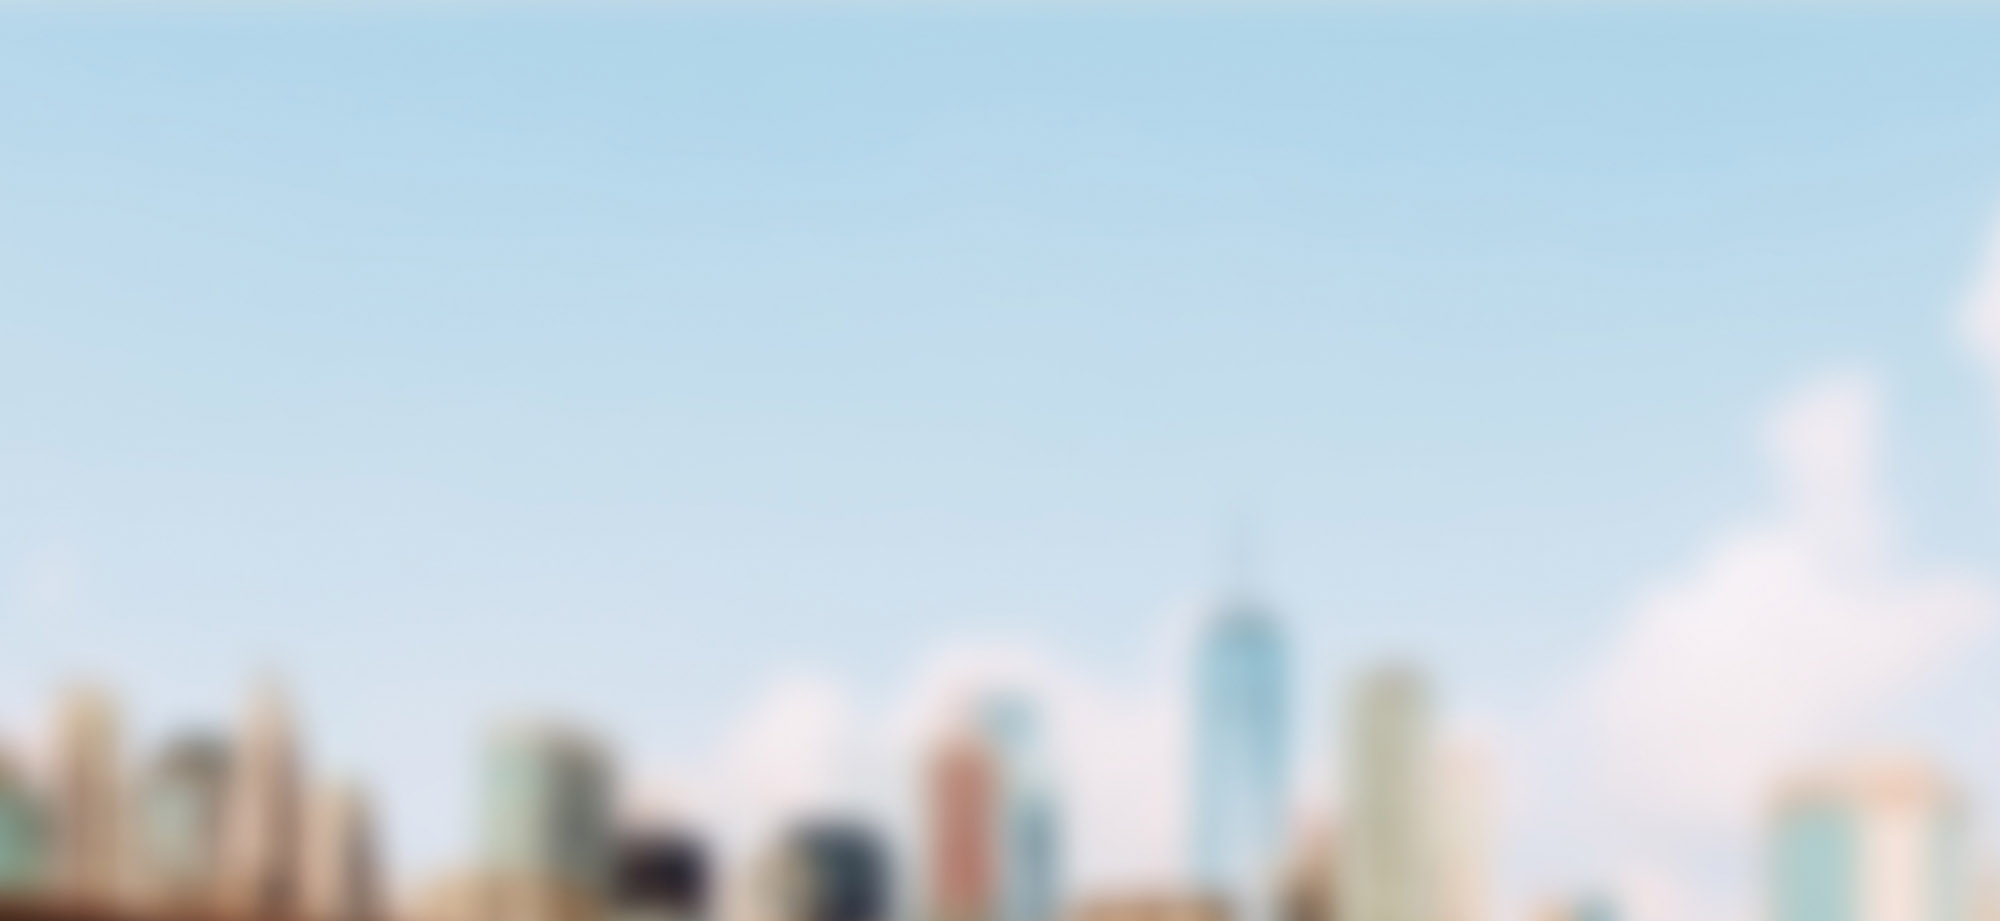 Home page cover image of a blurry blue sky and skyscraper.